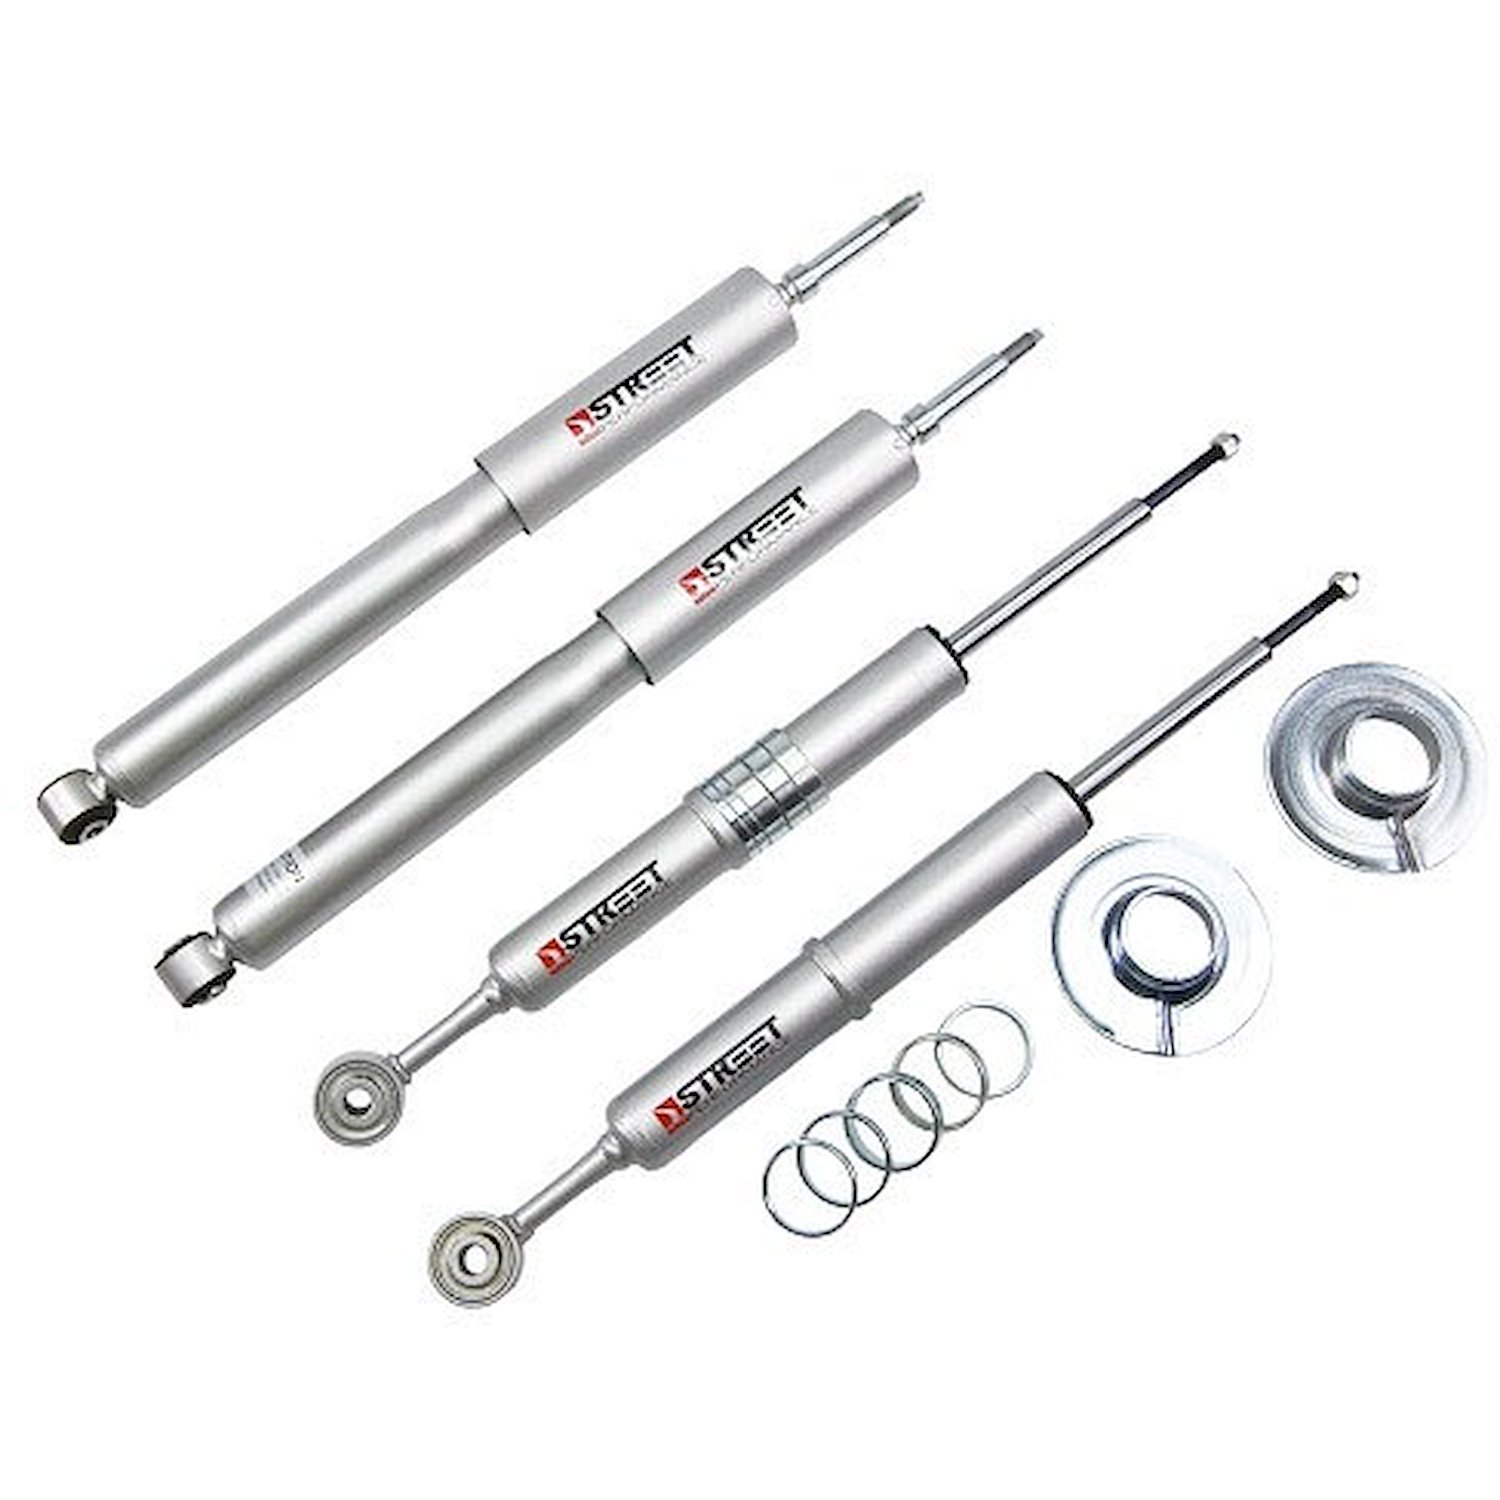 Street Performance OEM Shock Set for 2009-2013 Ford F-150 4WD